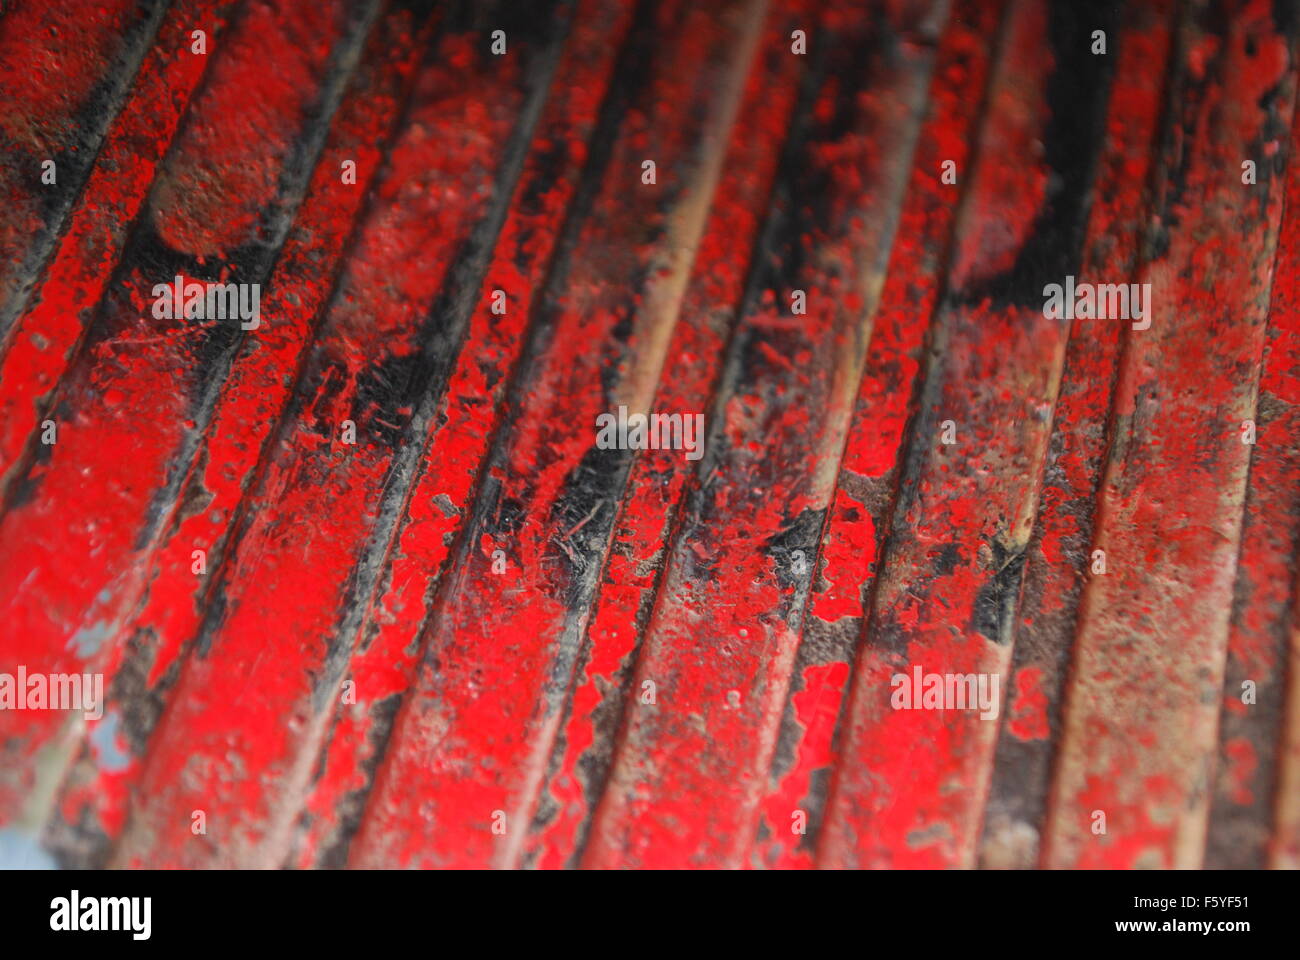 Grooves inside cannon barrel. Stock Photo